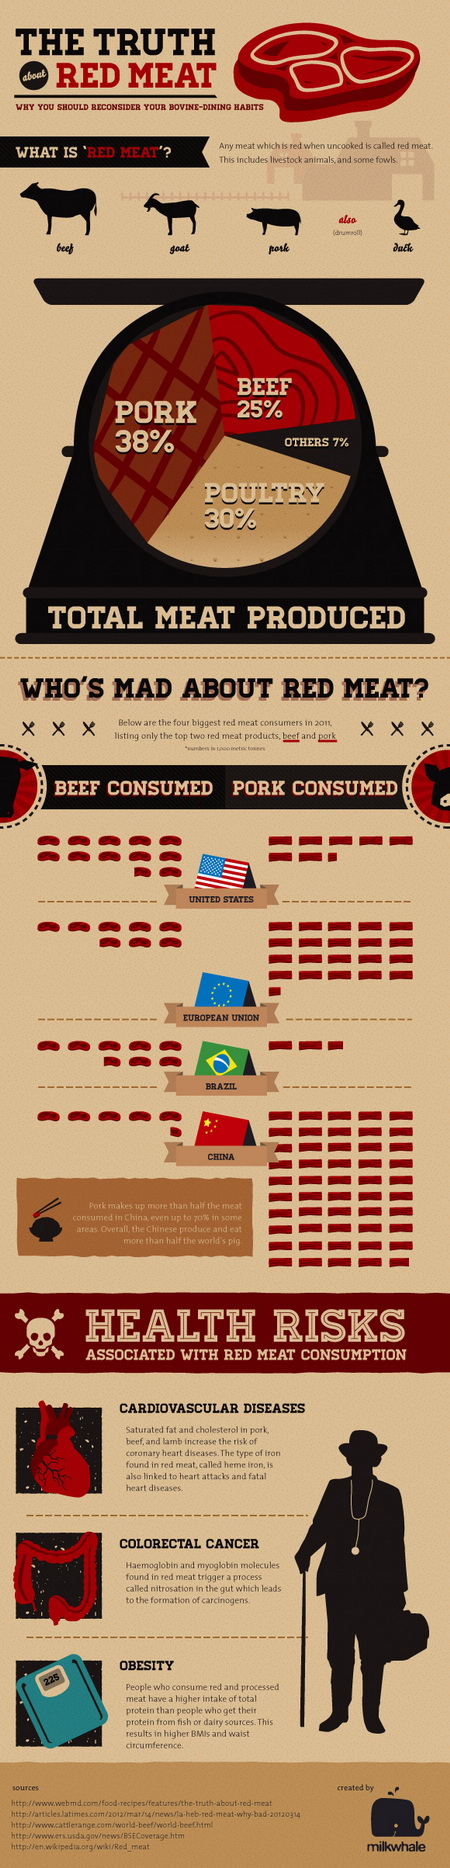 Redmeat Infographic: The Truth About Red Meat | Milkwhale